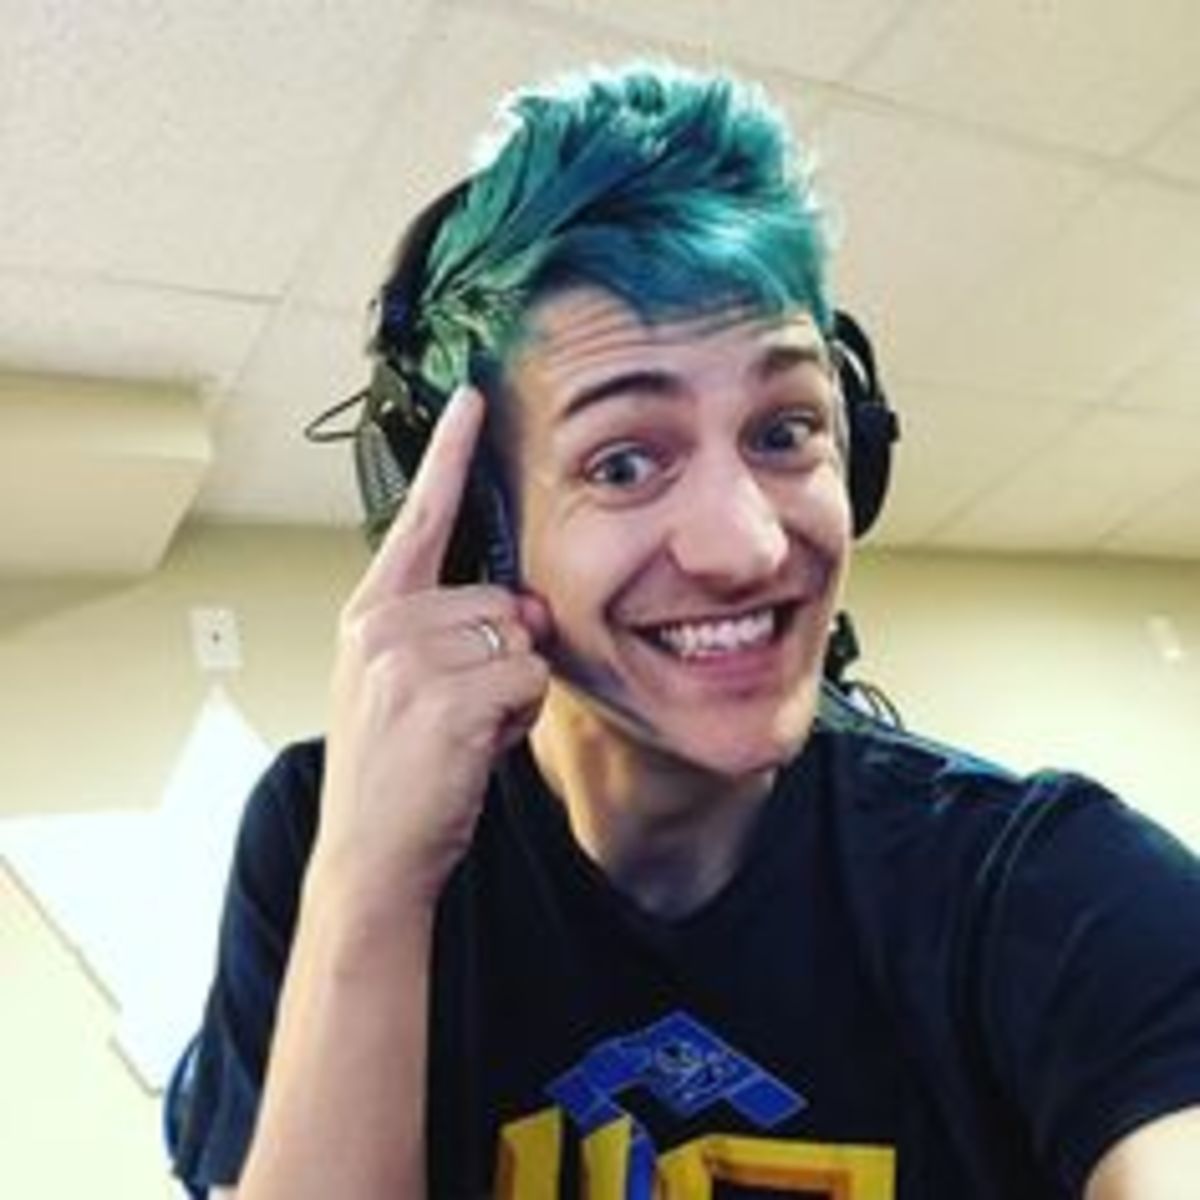 Is Ninja immature or level-headed and professional?